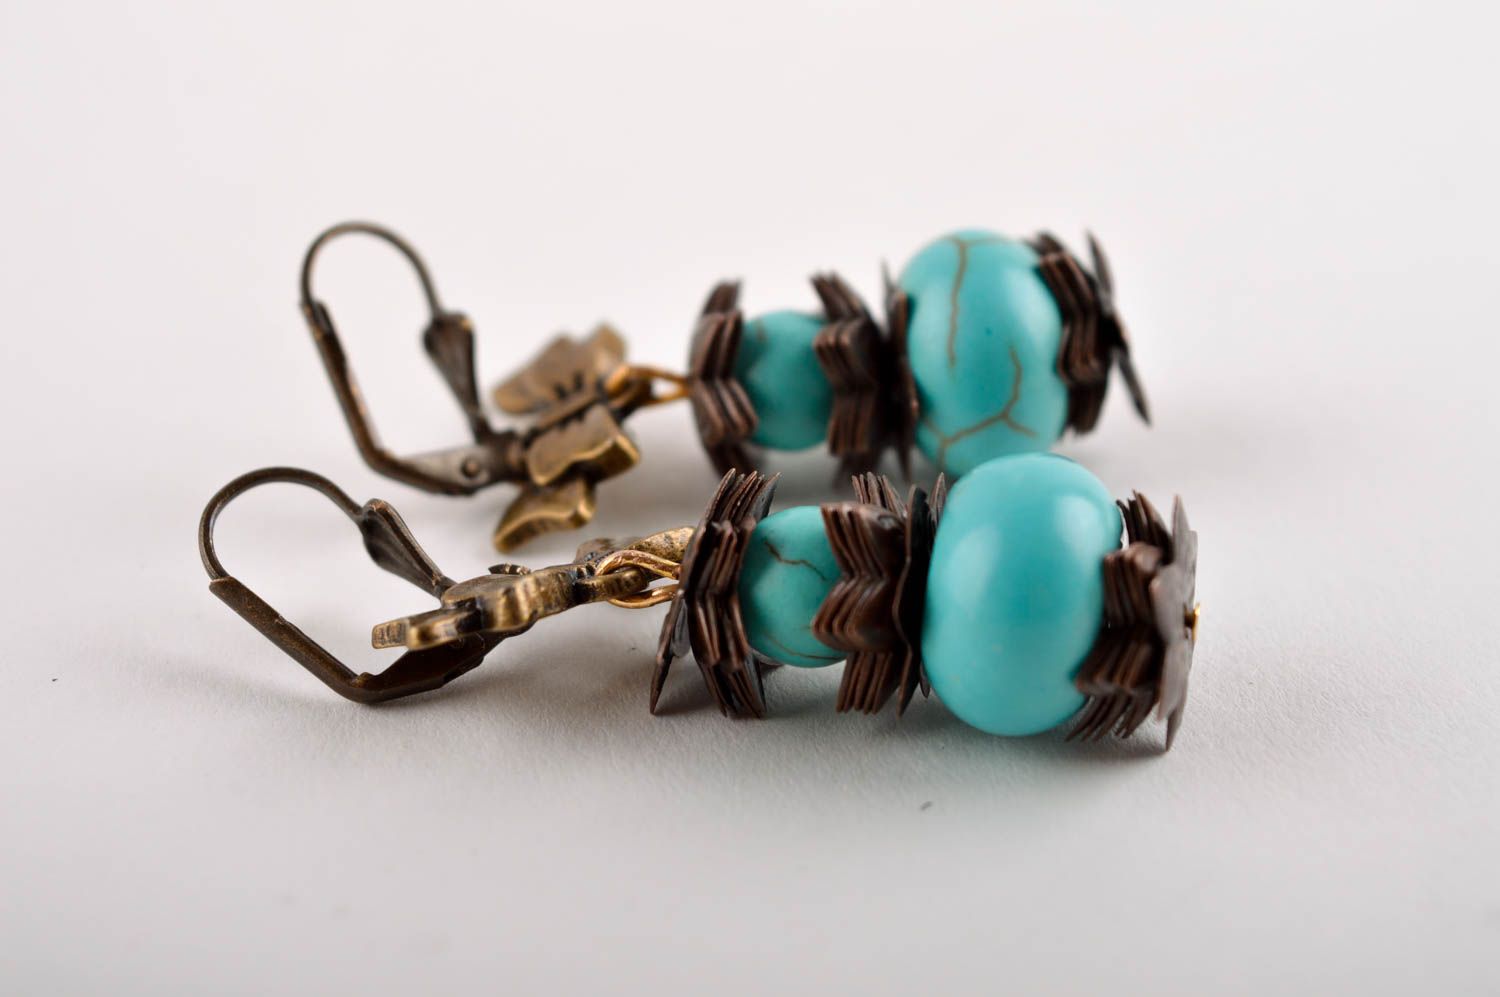 Homemade jewelry designer earrings turquoise earrings cool jewelry gifts for her photo 3